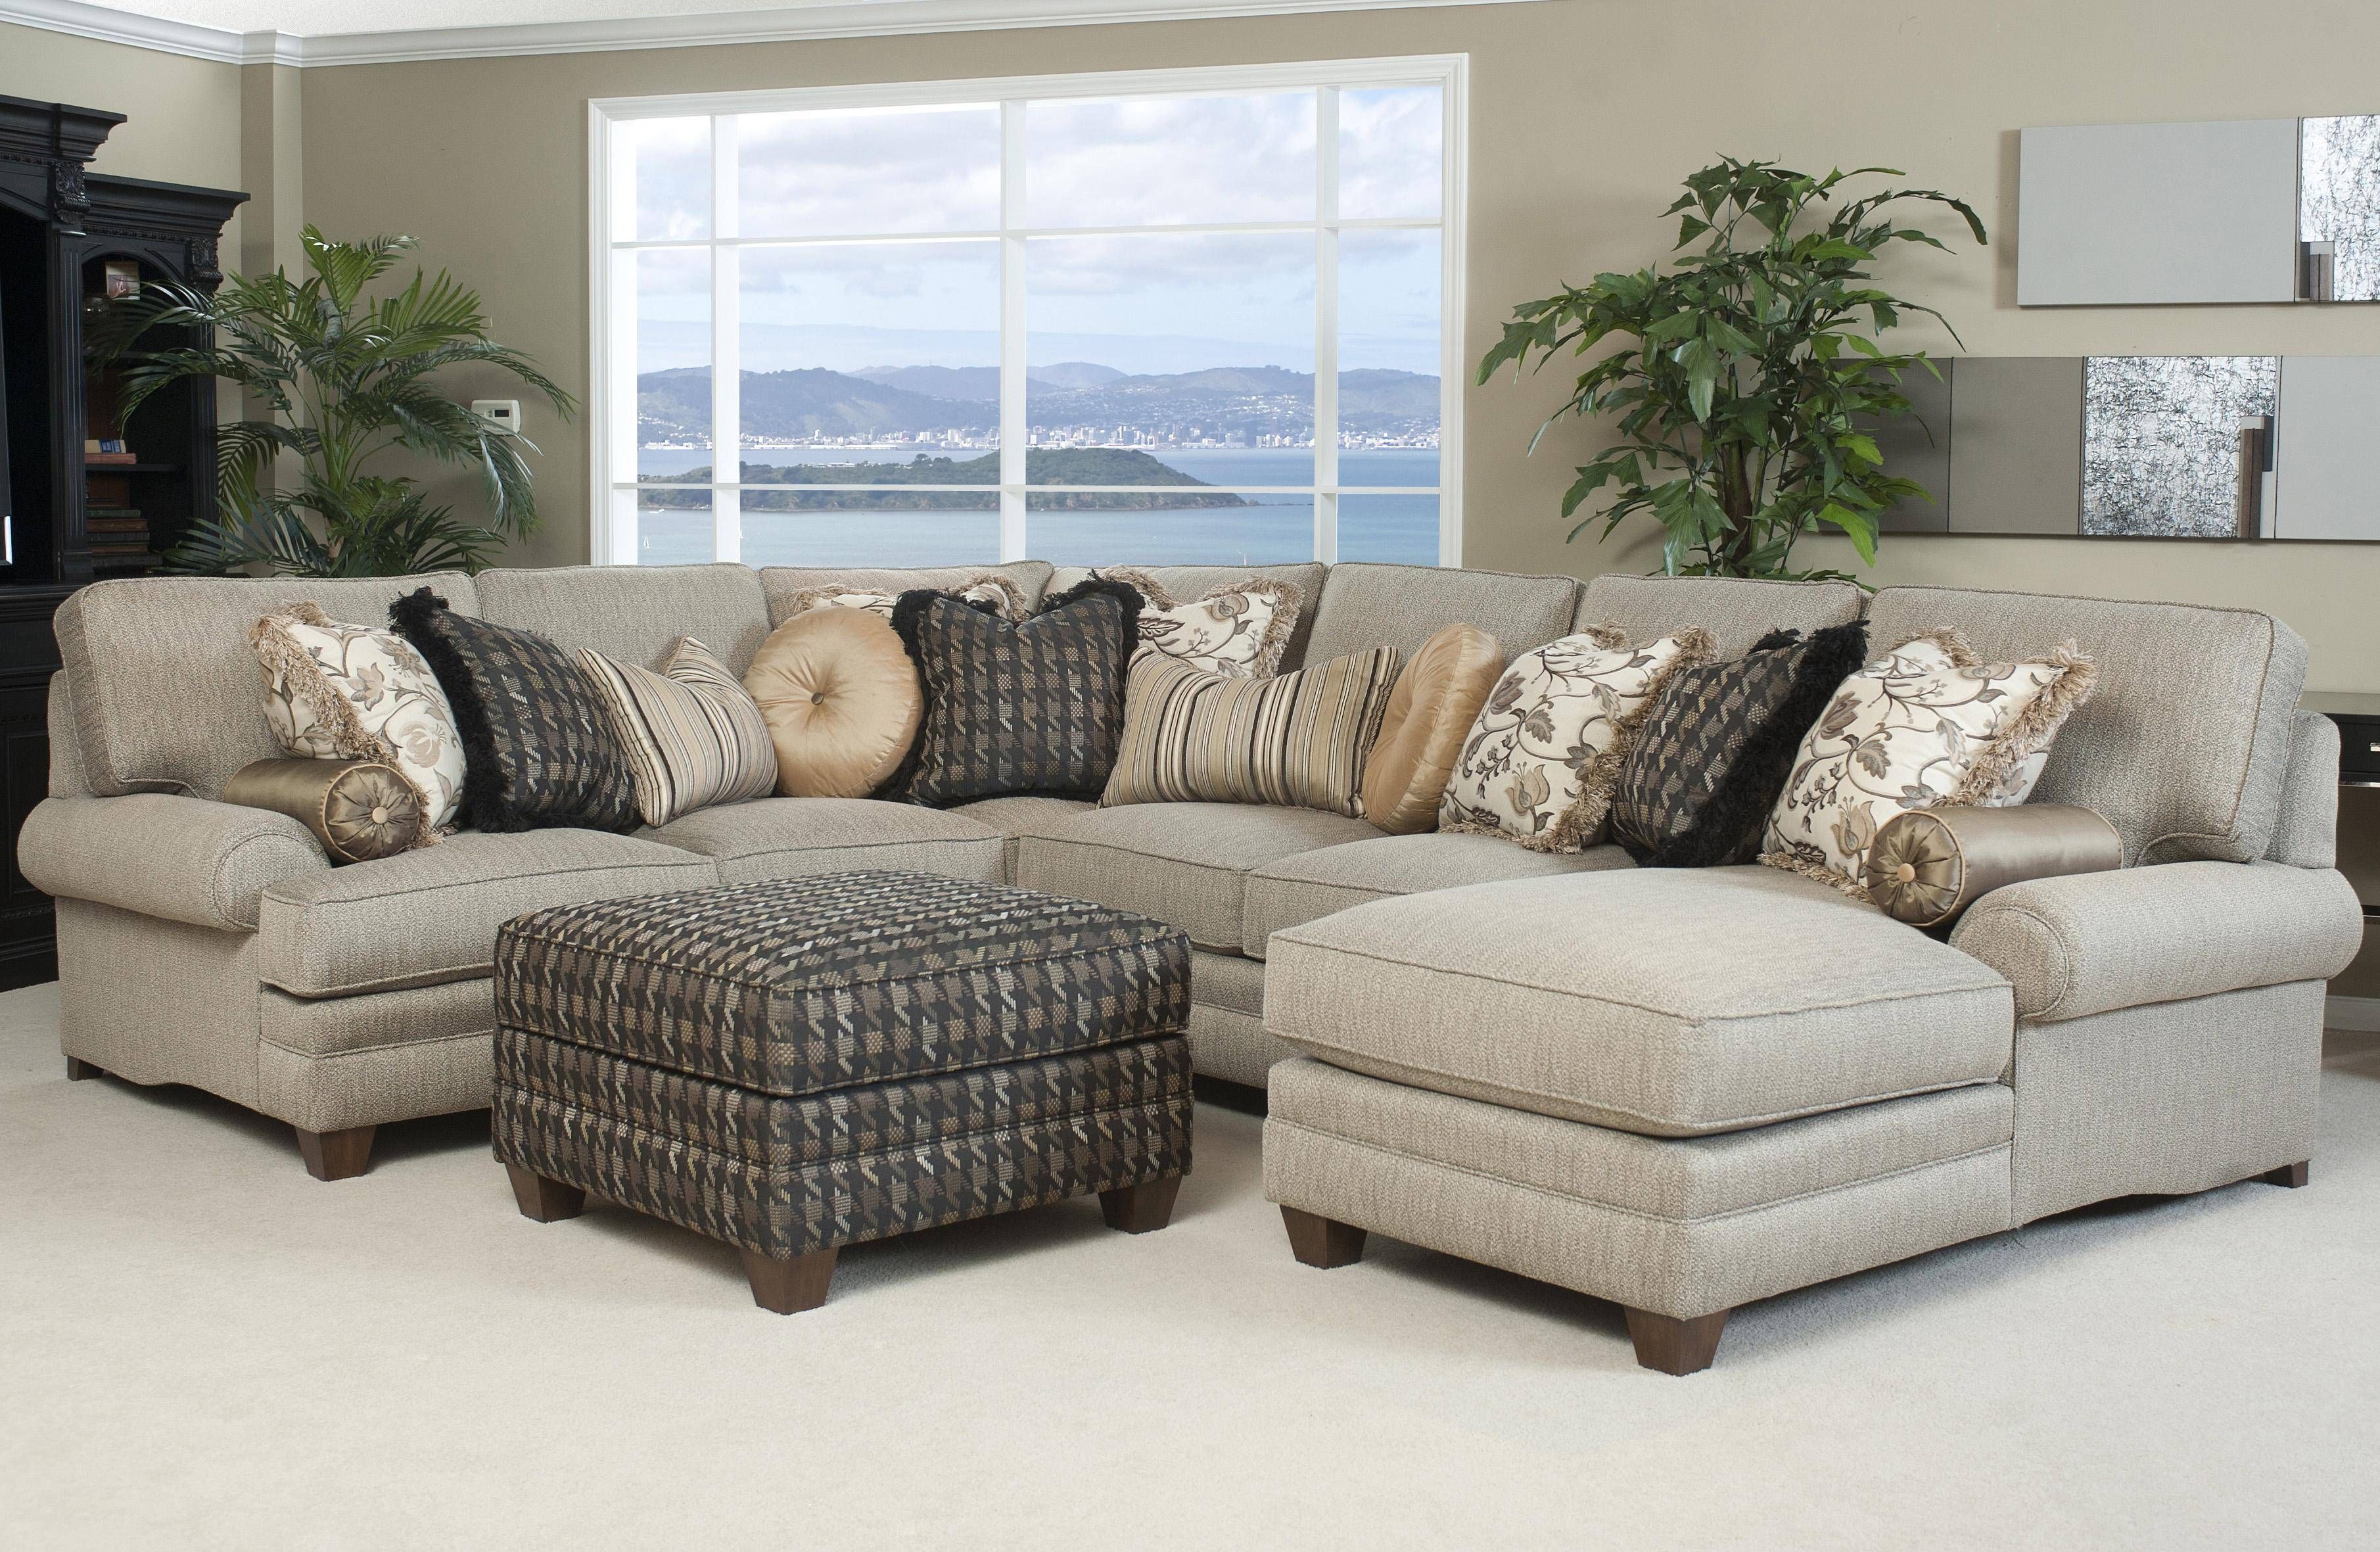 Traditional Styled Sectional Sofa With Comfortable Pillowed Seat For Traditional Sectional Sofas Living Room Furniture (Photo 4 of 25)